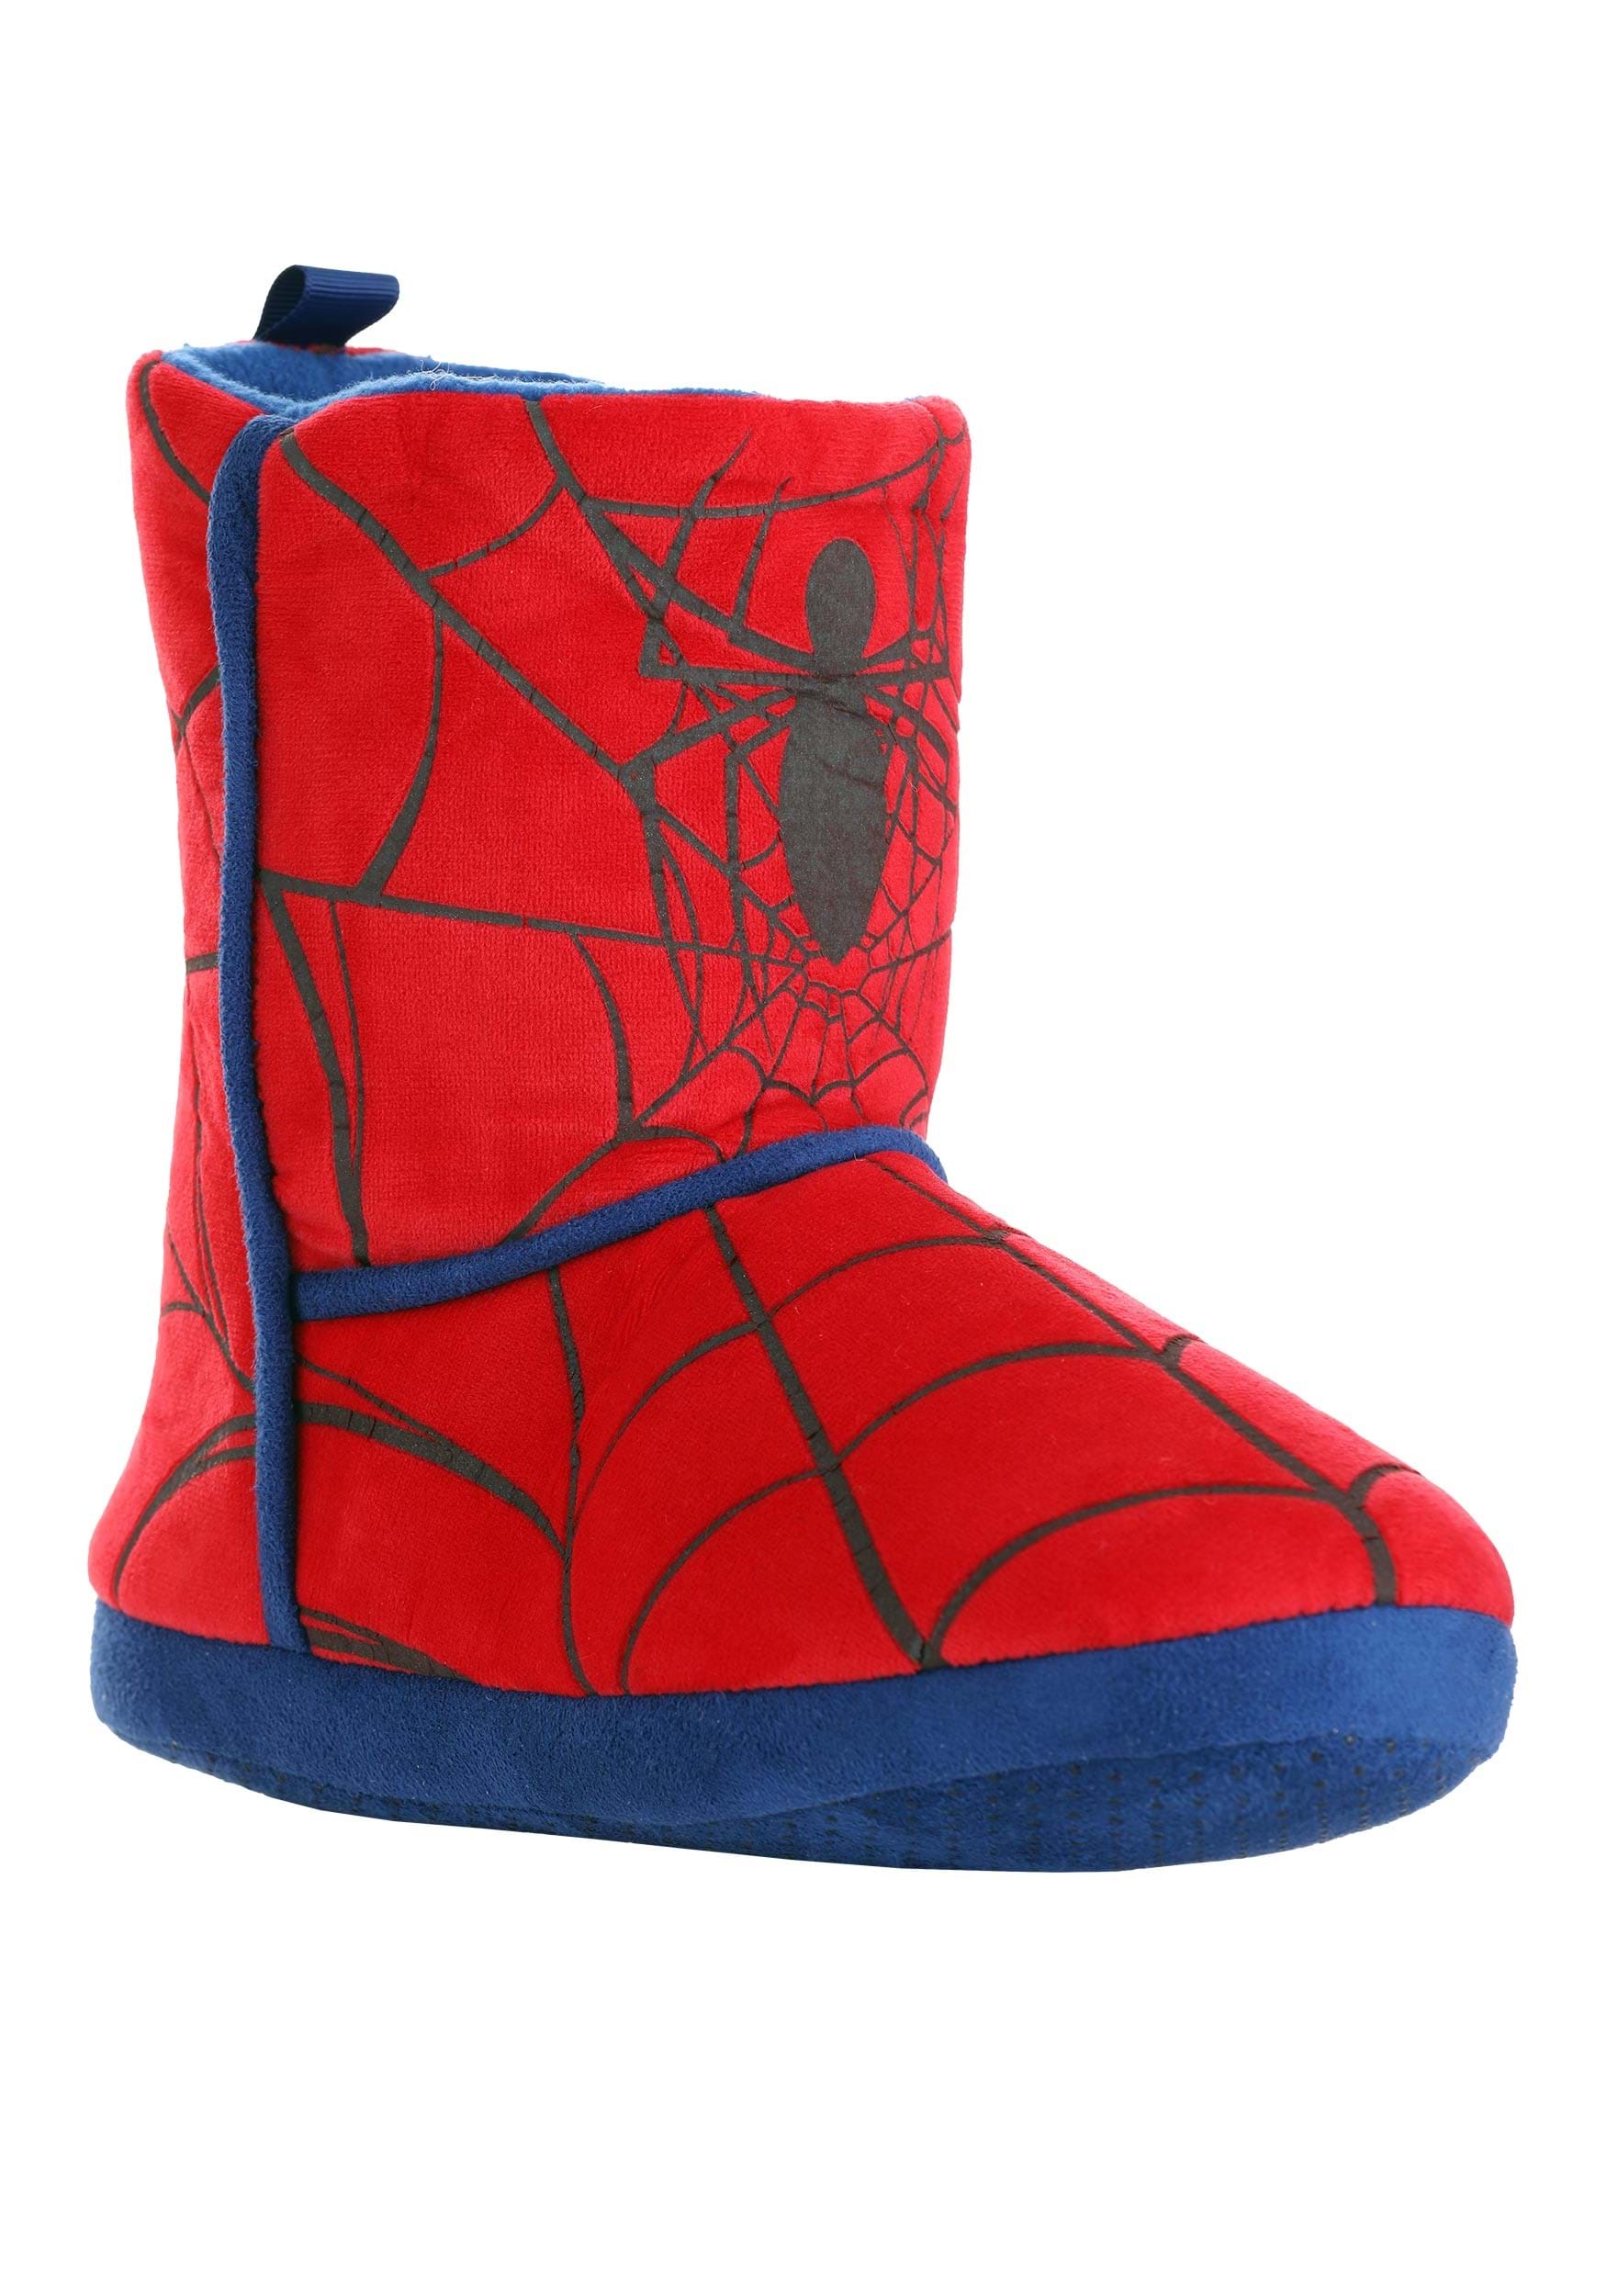 Spider-Man Boot Adult Slippers